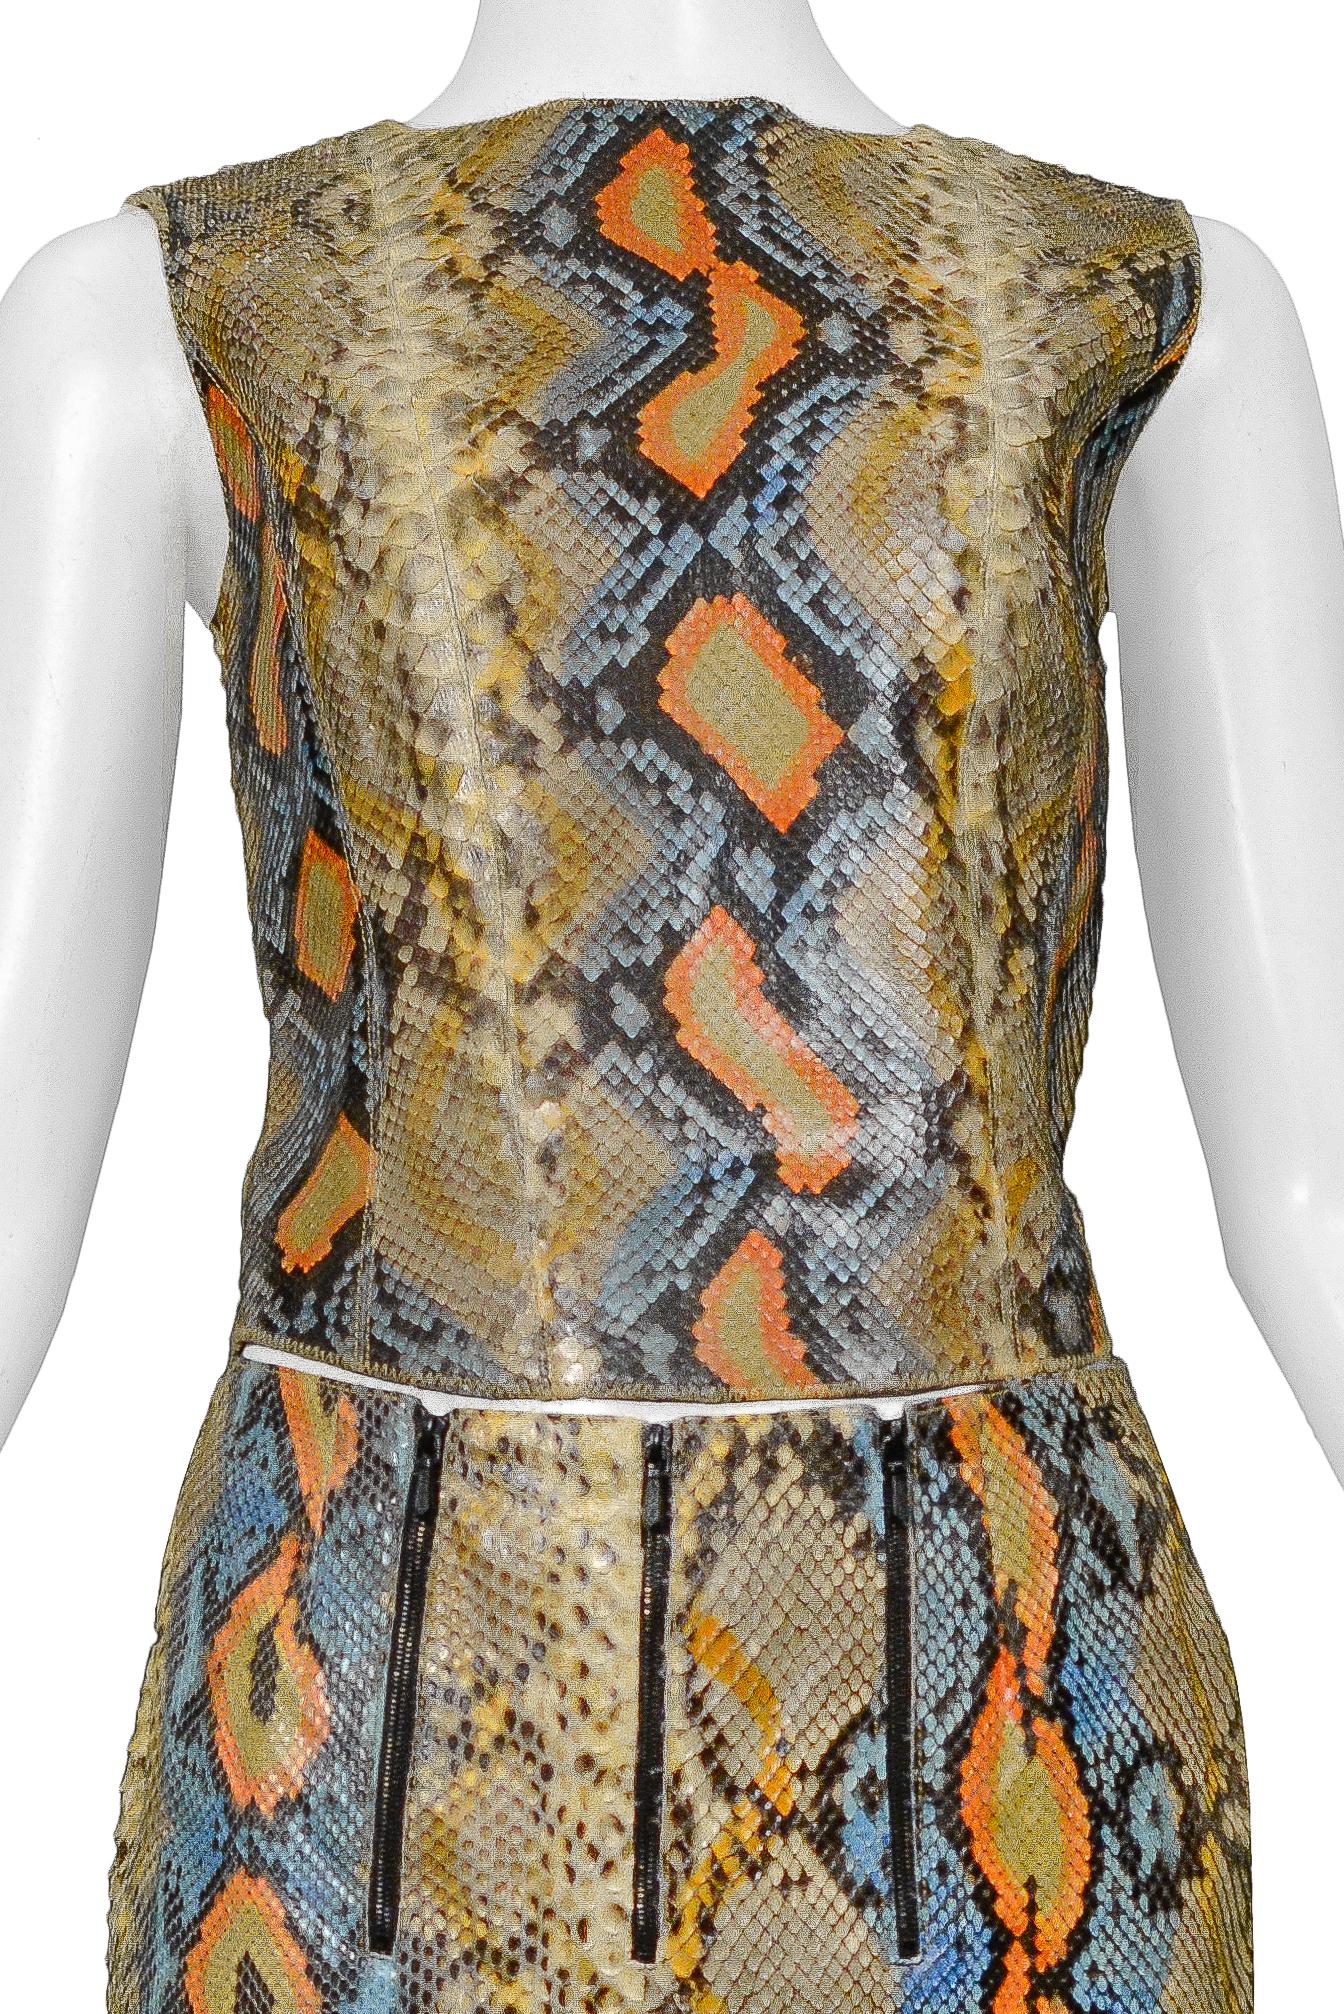 Rare Chanel Python Leather 2000 Runway Top & Pants Ensemble In Excellent Condition For Sale In Los Angeles, CA